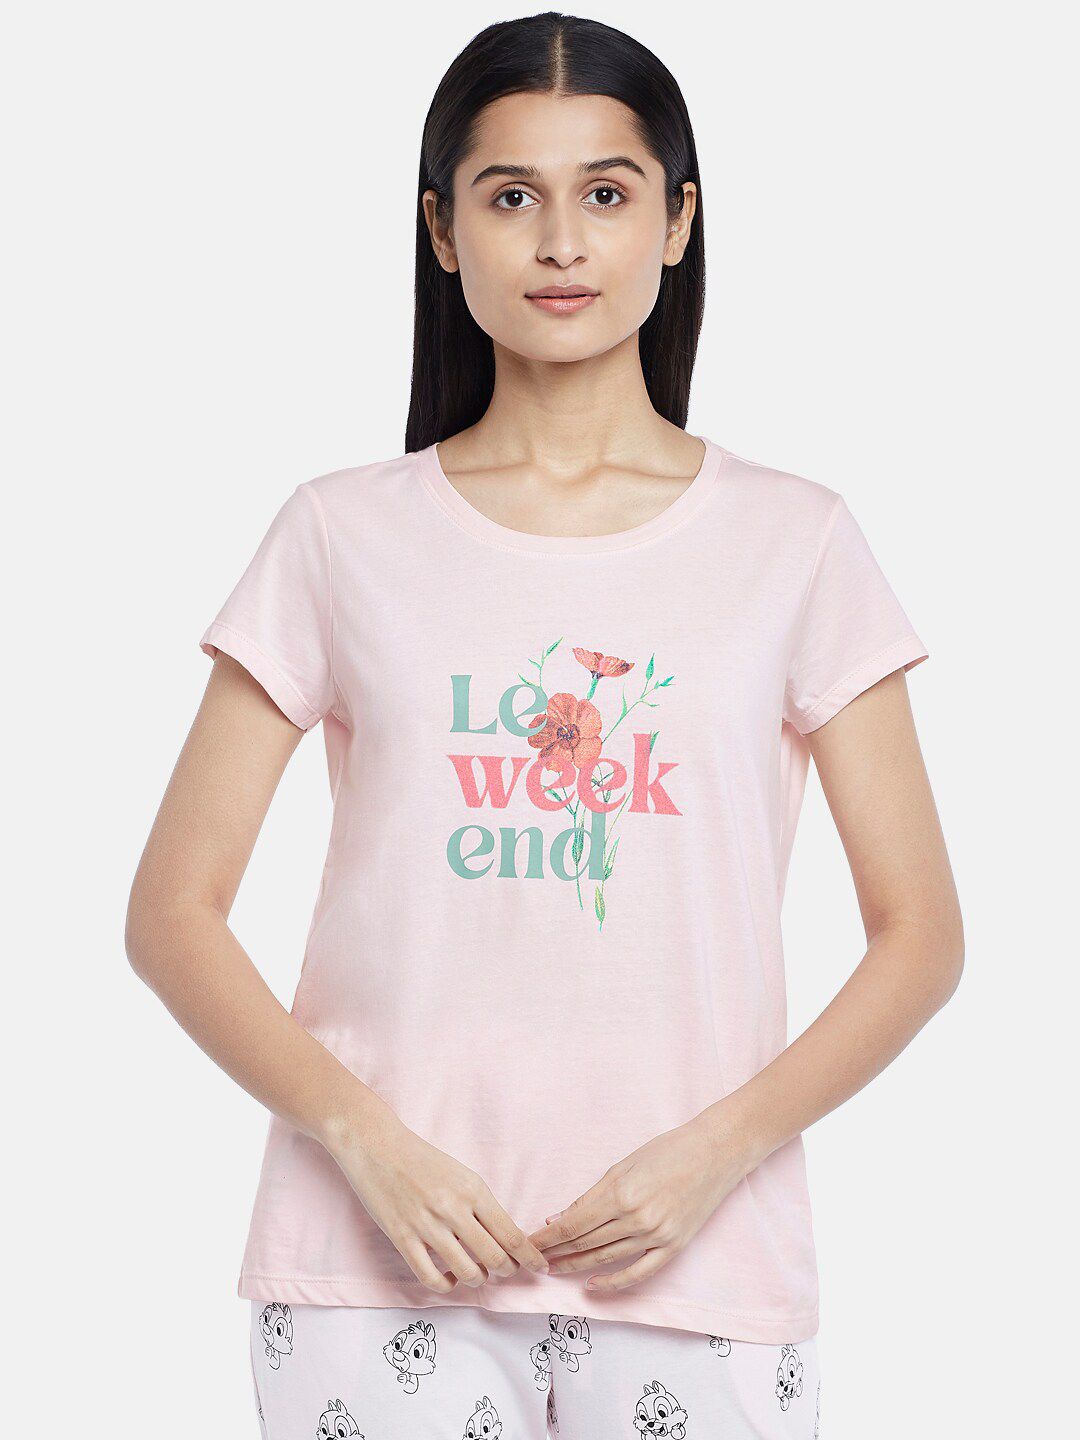 Dreamz by Pantaloons Women Pink Printed T-shirts Price in India